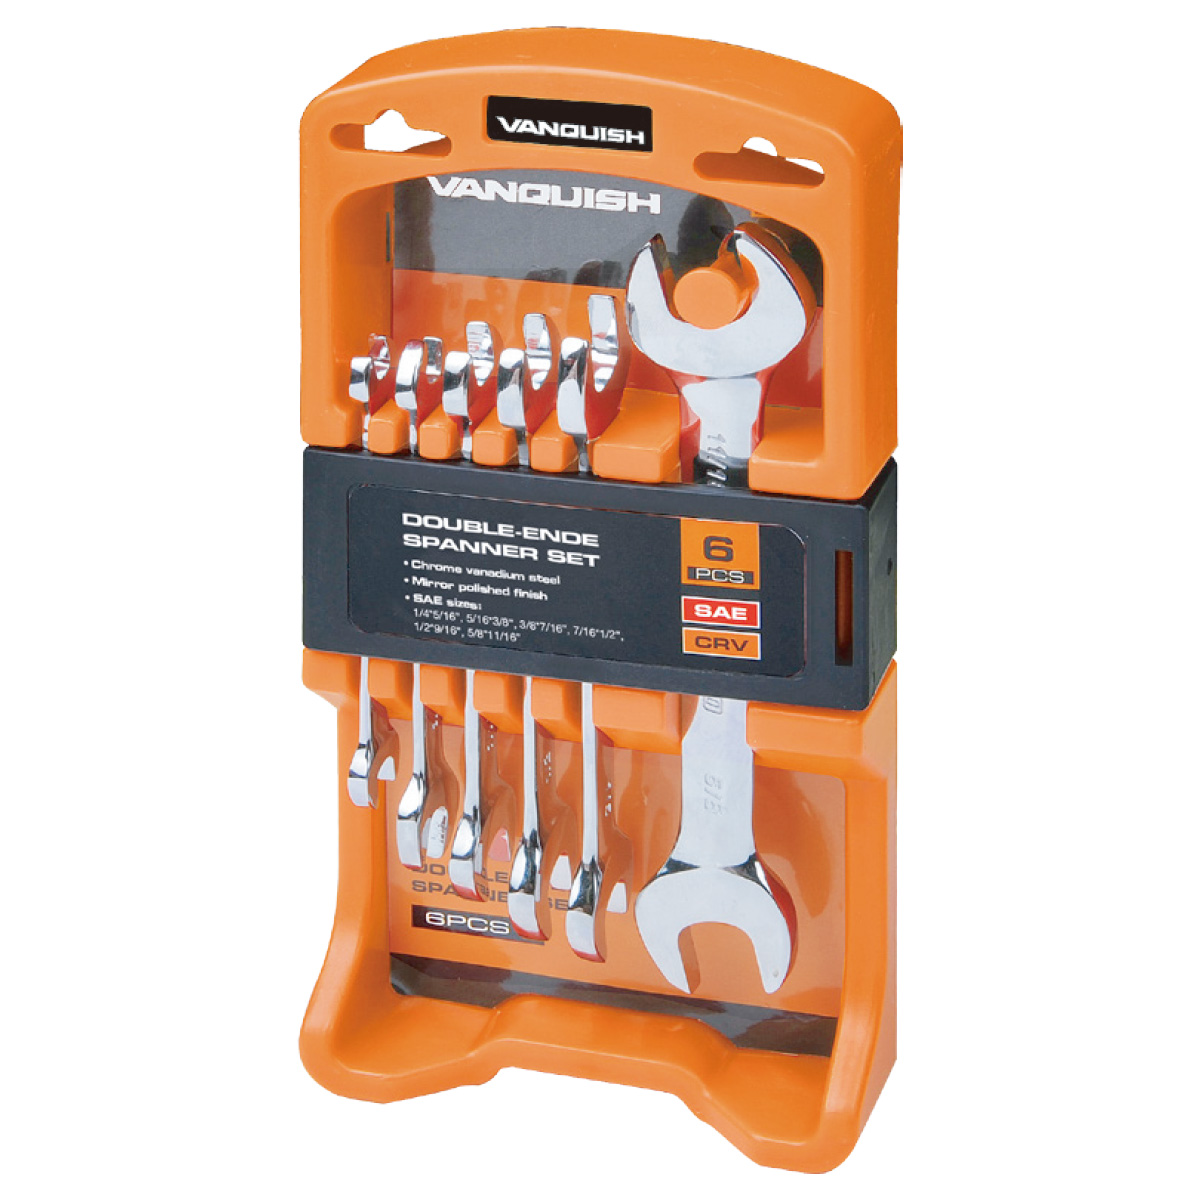 6-PIECE DOUBLE-ENDED  SPANNER SET